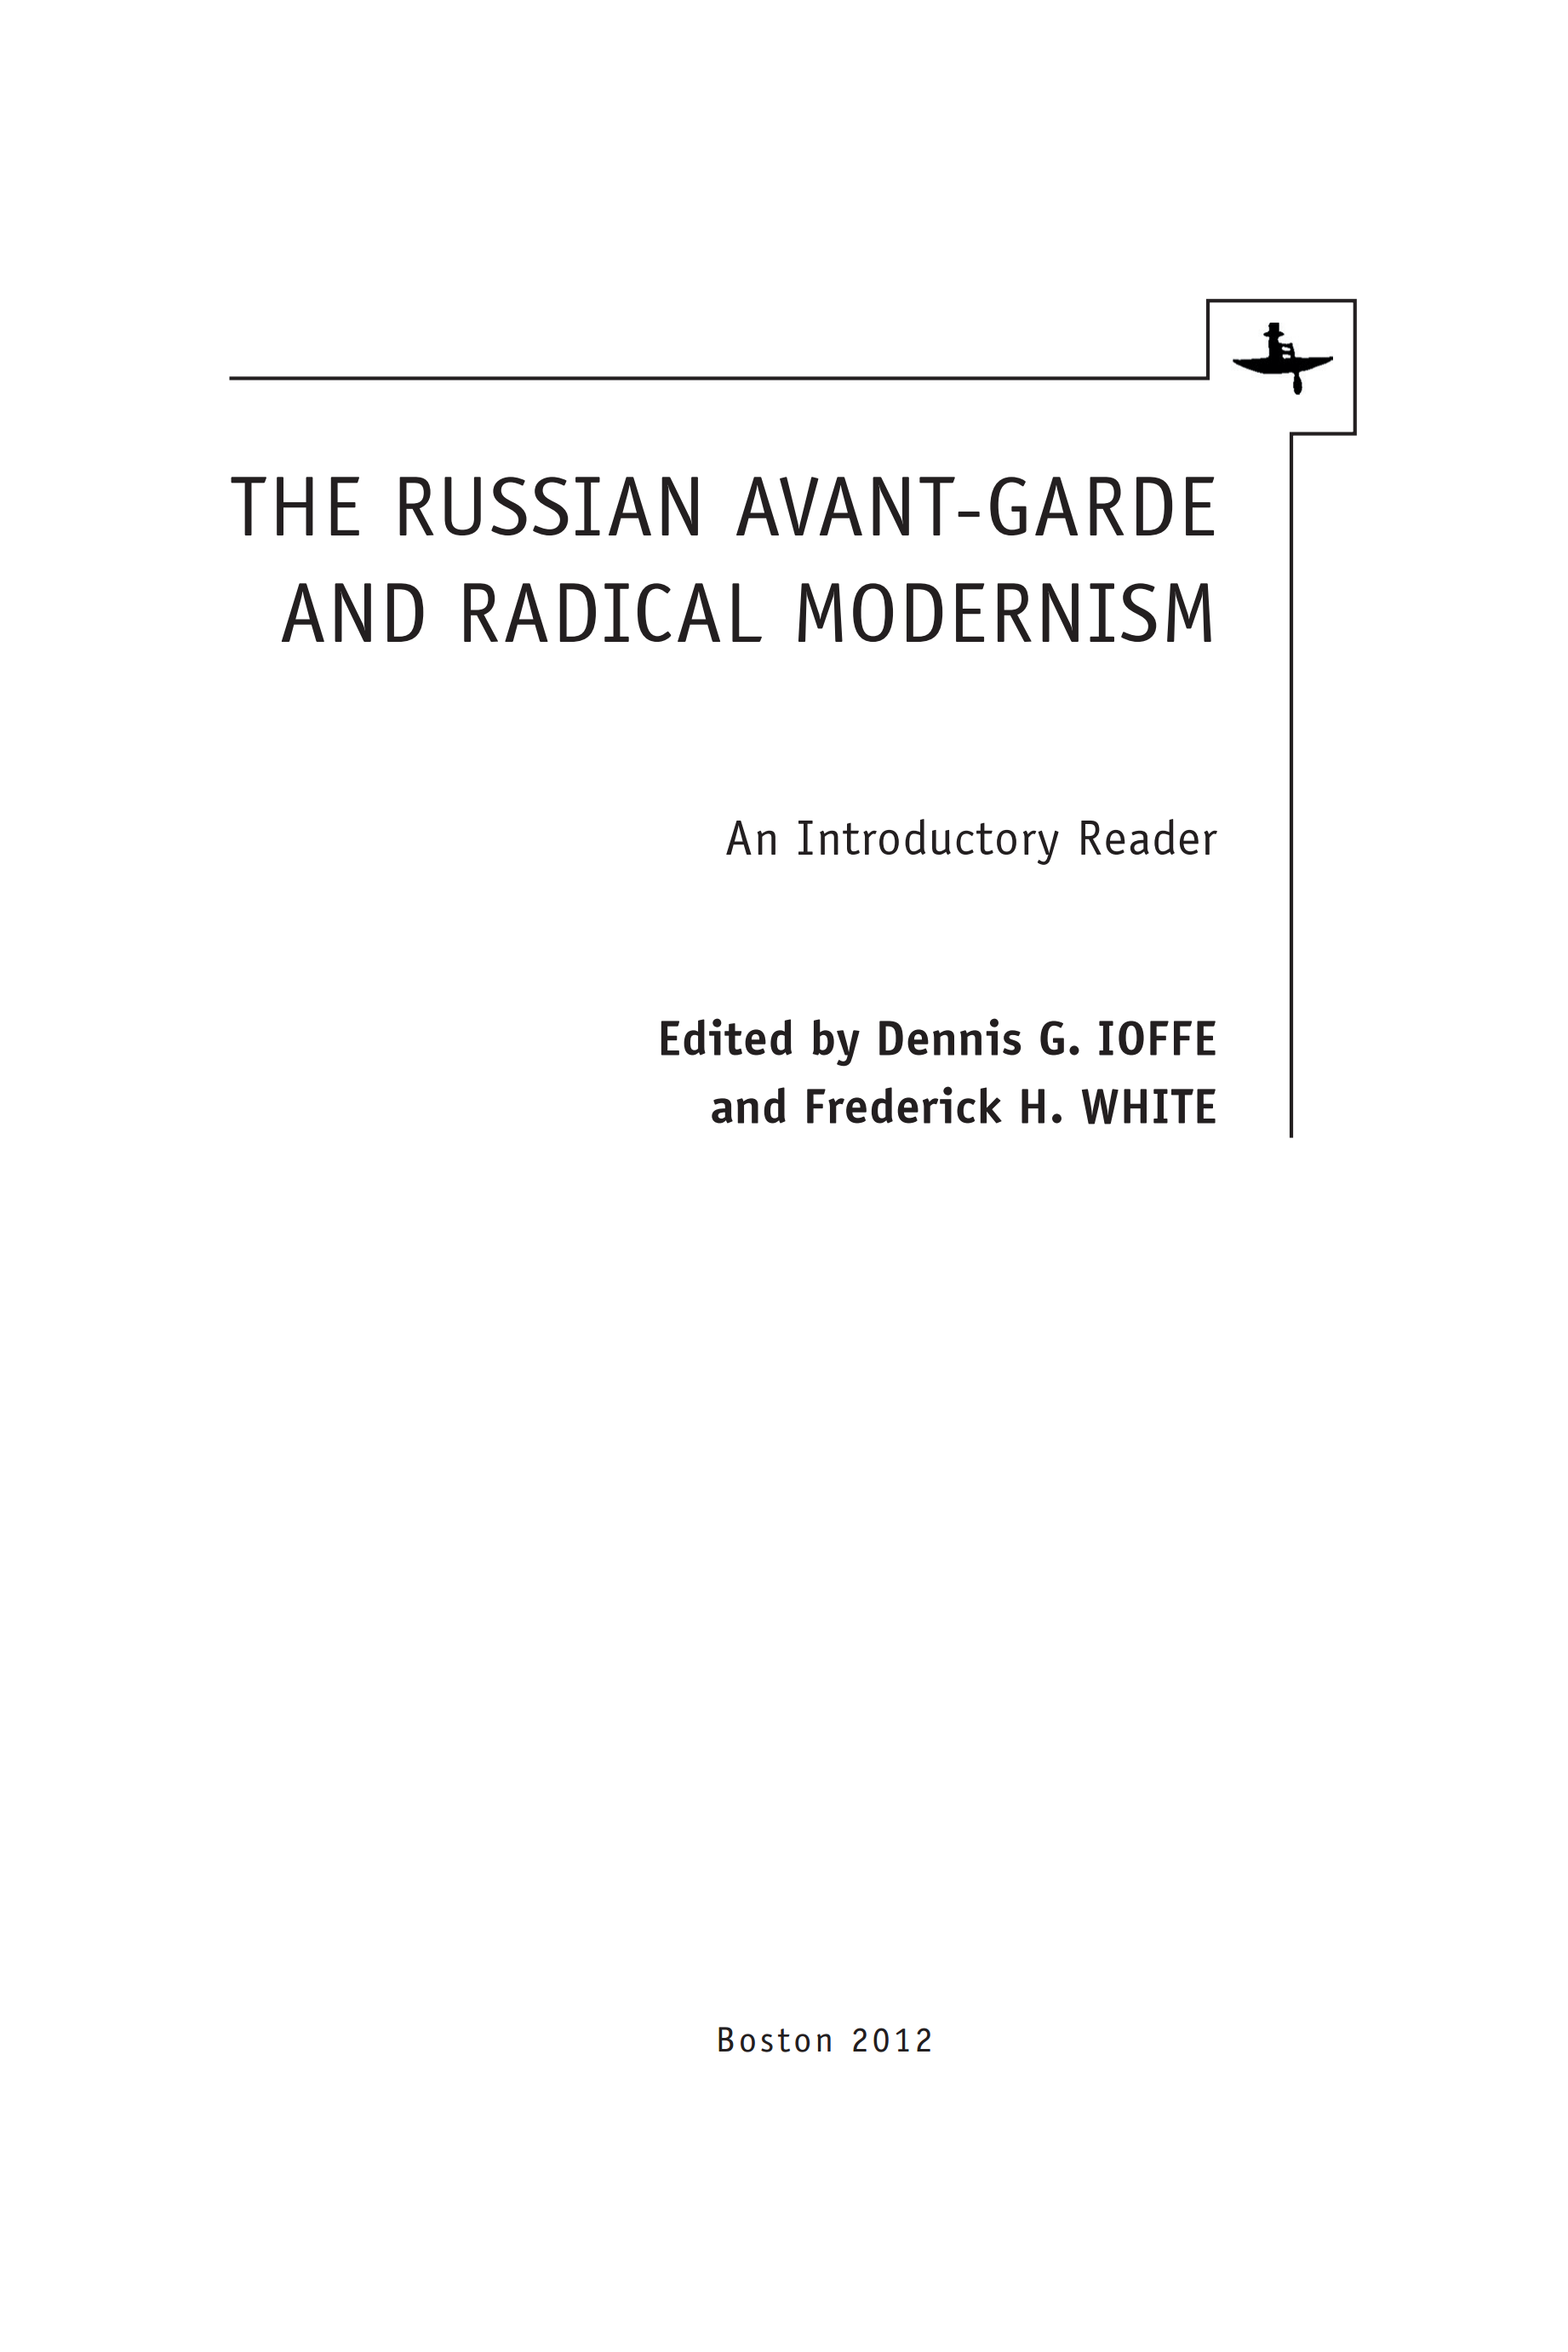 The Russian Avant-Garde and Radical Modernism : An Introductory Reader / Edited by Dennis G. Ioffe and Frederick H. White. — Boston : Academic Studies Press, 2012